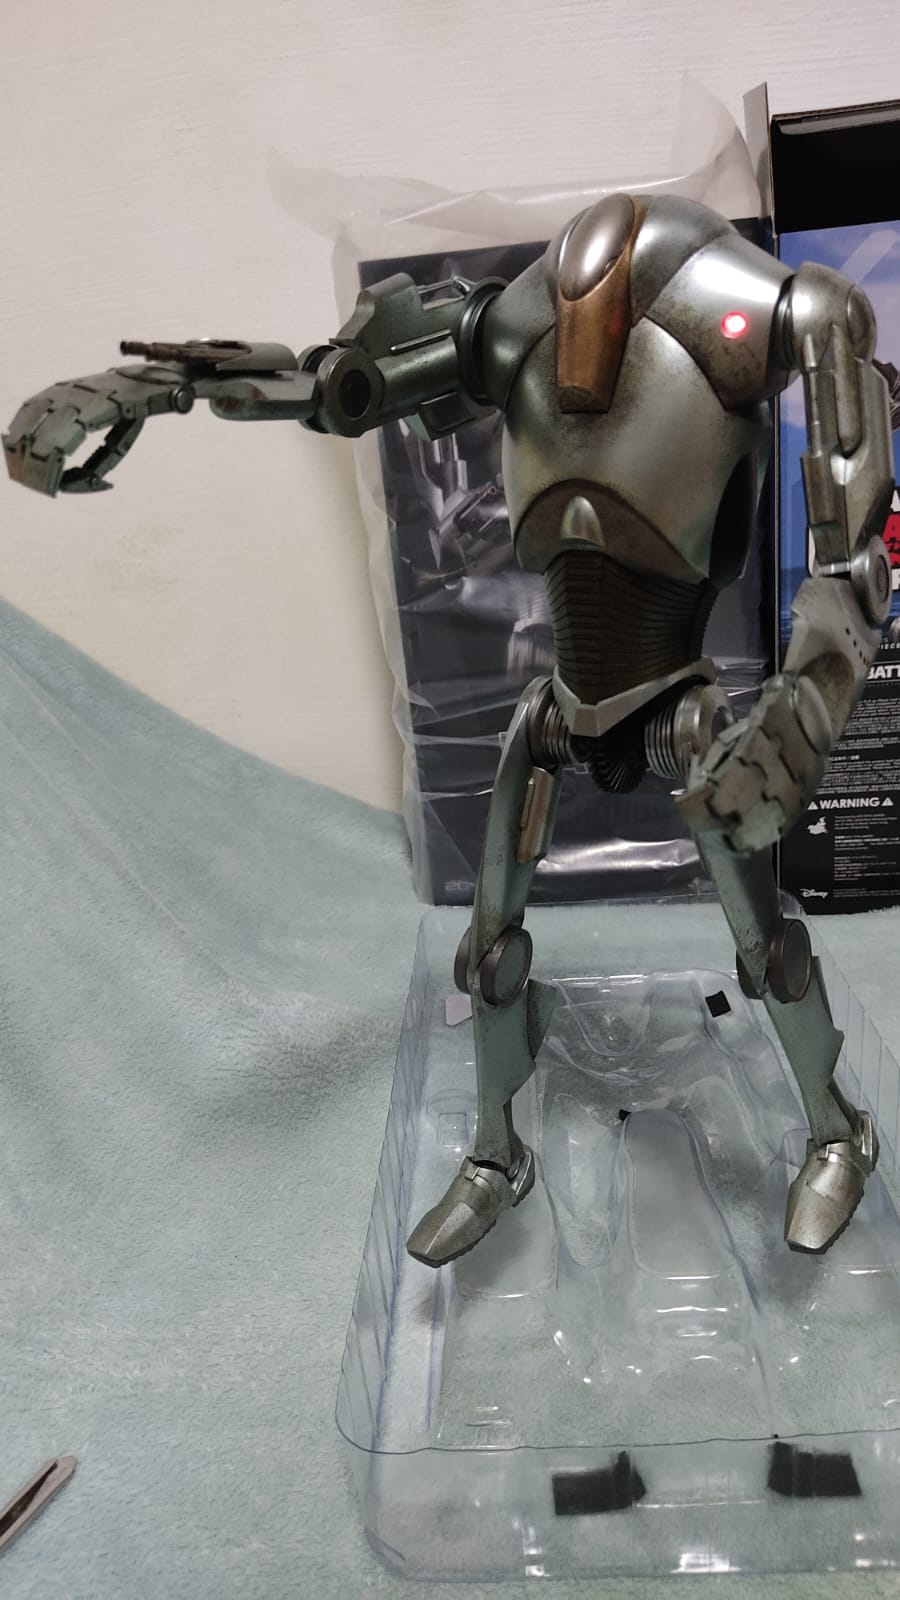 SuperBattleDroid - NEW PRODUCT: HOT TOYS: STAR WARS EPISODE II: ATTACK OF THE CLONES™ SUPER BATTLE DROID™ 1/6TH SCALE COLLECTIBLE FIGURE Whats163